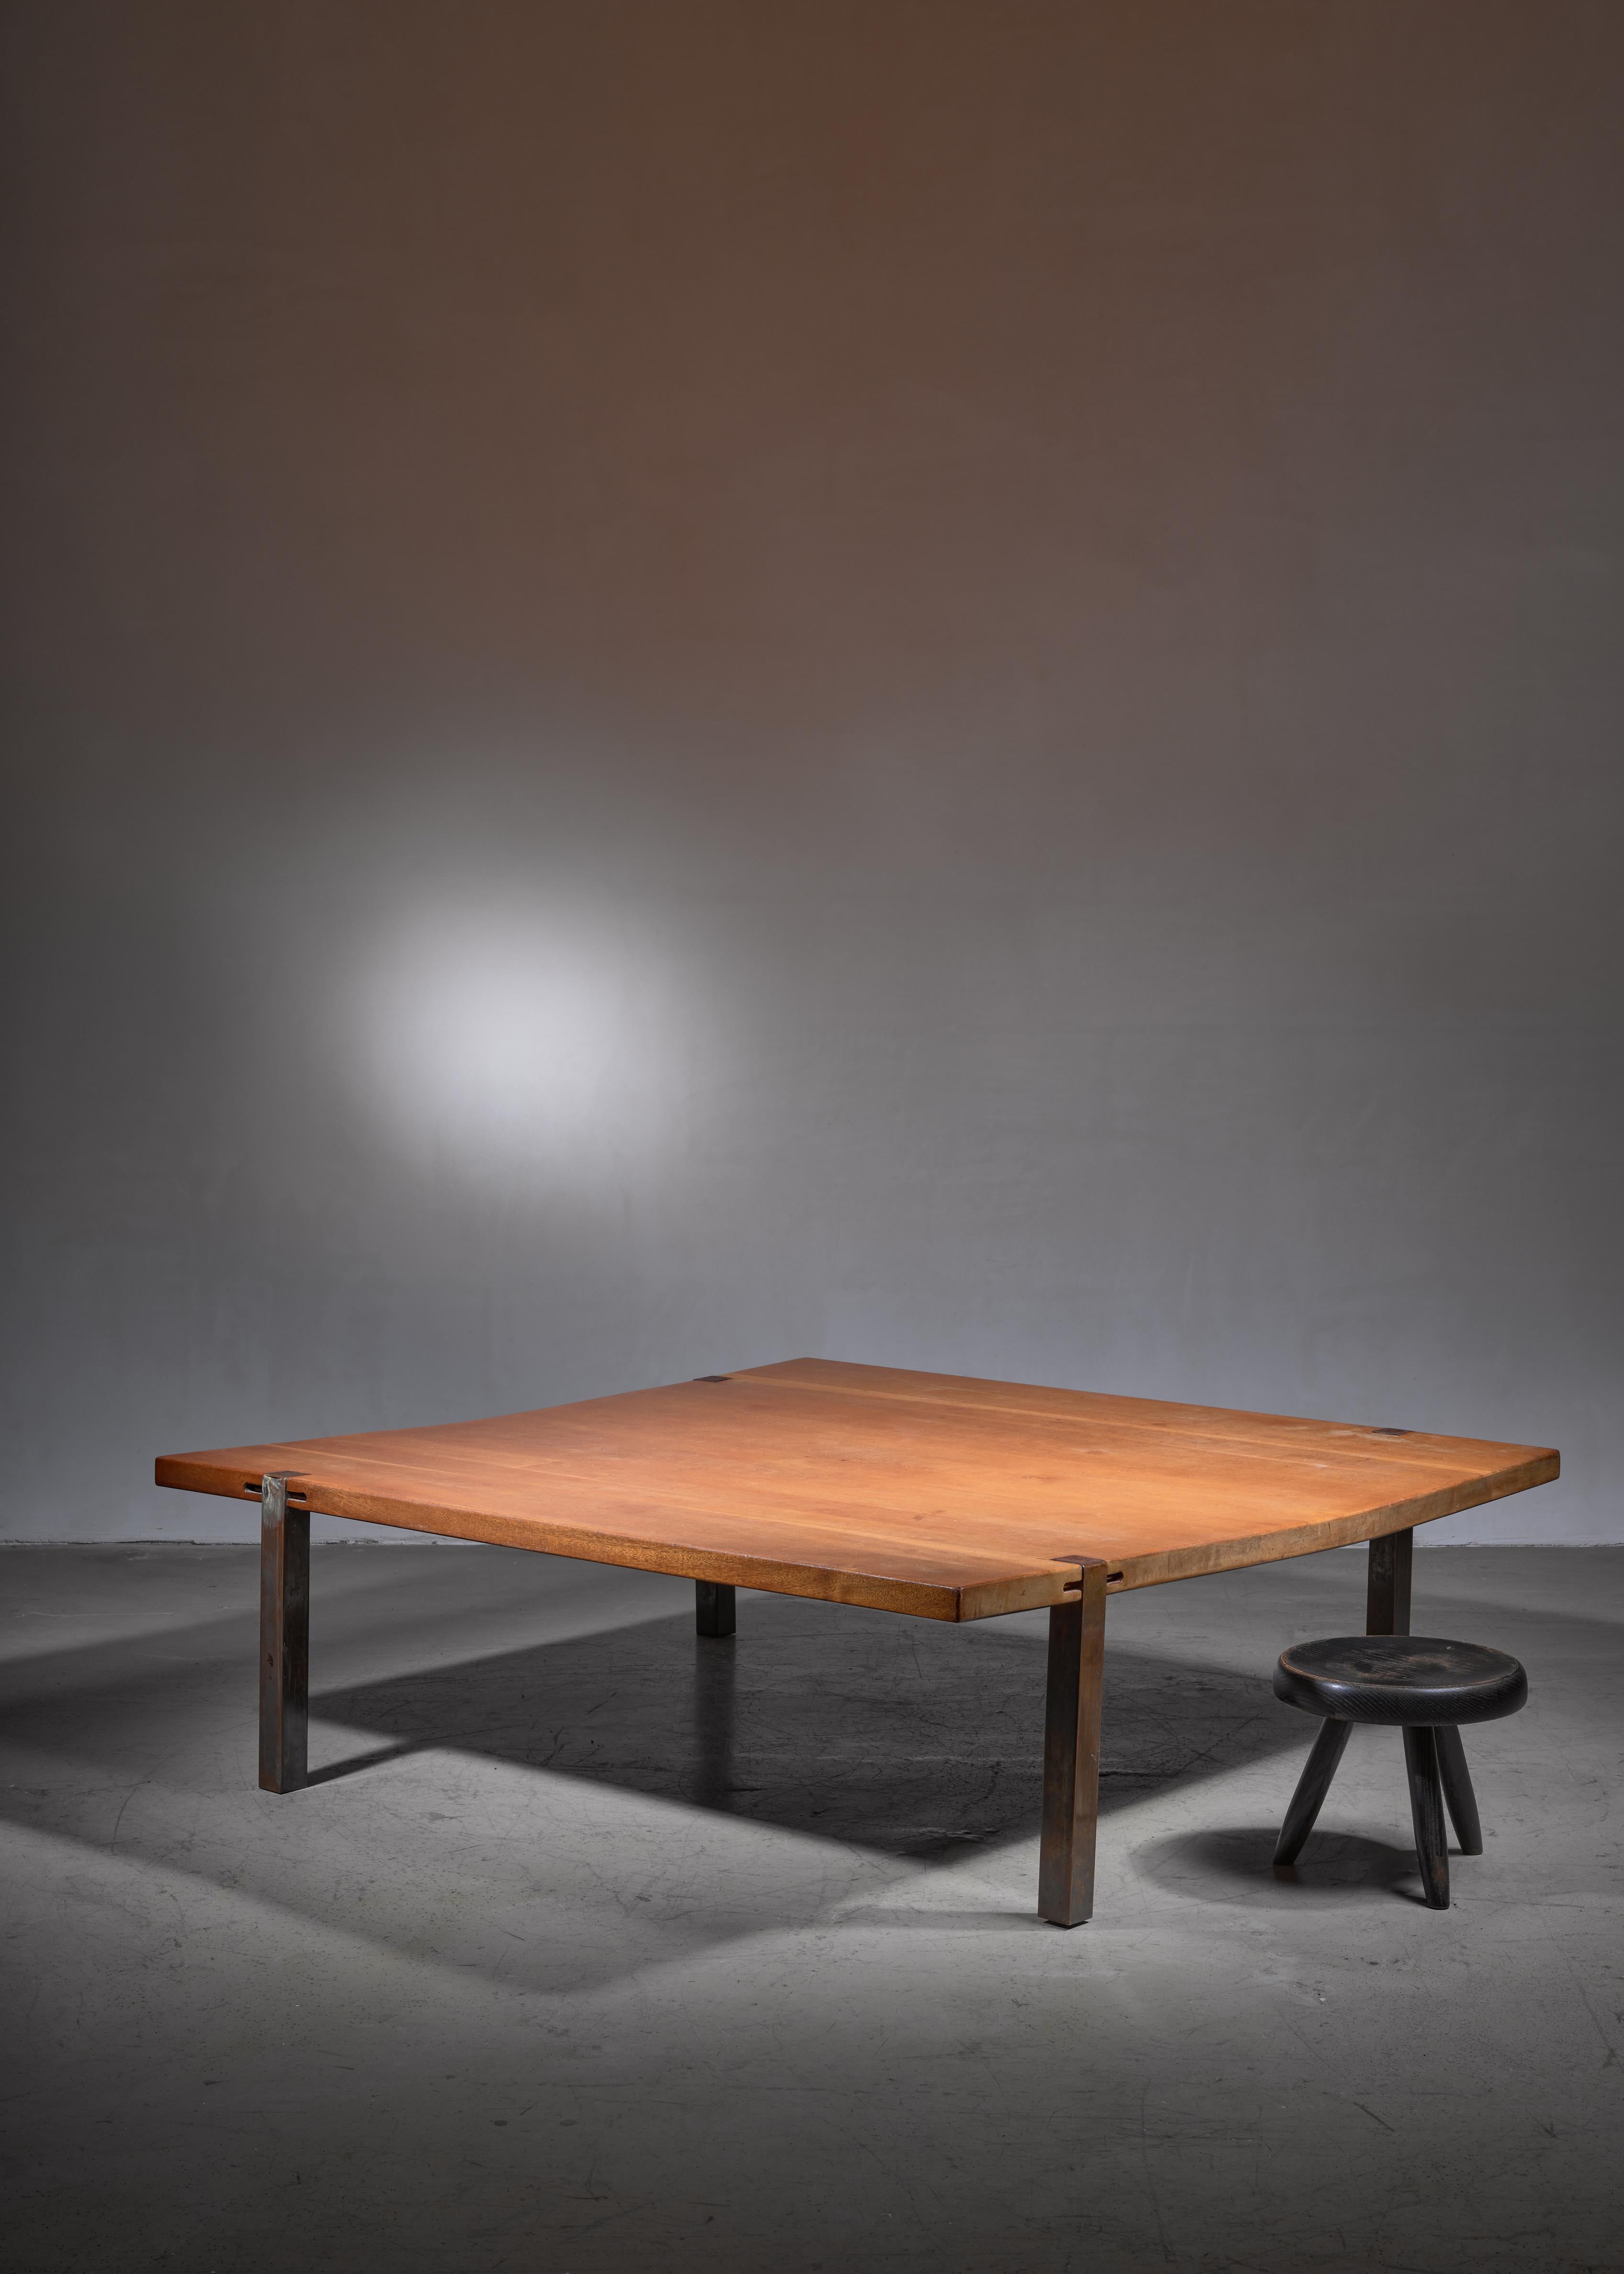 A very large square coffee table by an unknown Danish cabinetmaker. The table is made of a solid teak top, standing on four copper plated steel legs.
The top is sunbleached, giving the top an oak like appearance. The solid top is slightly bent